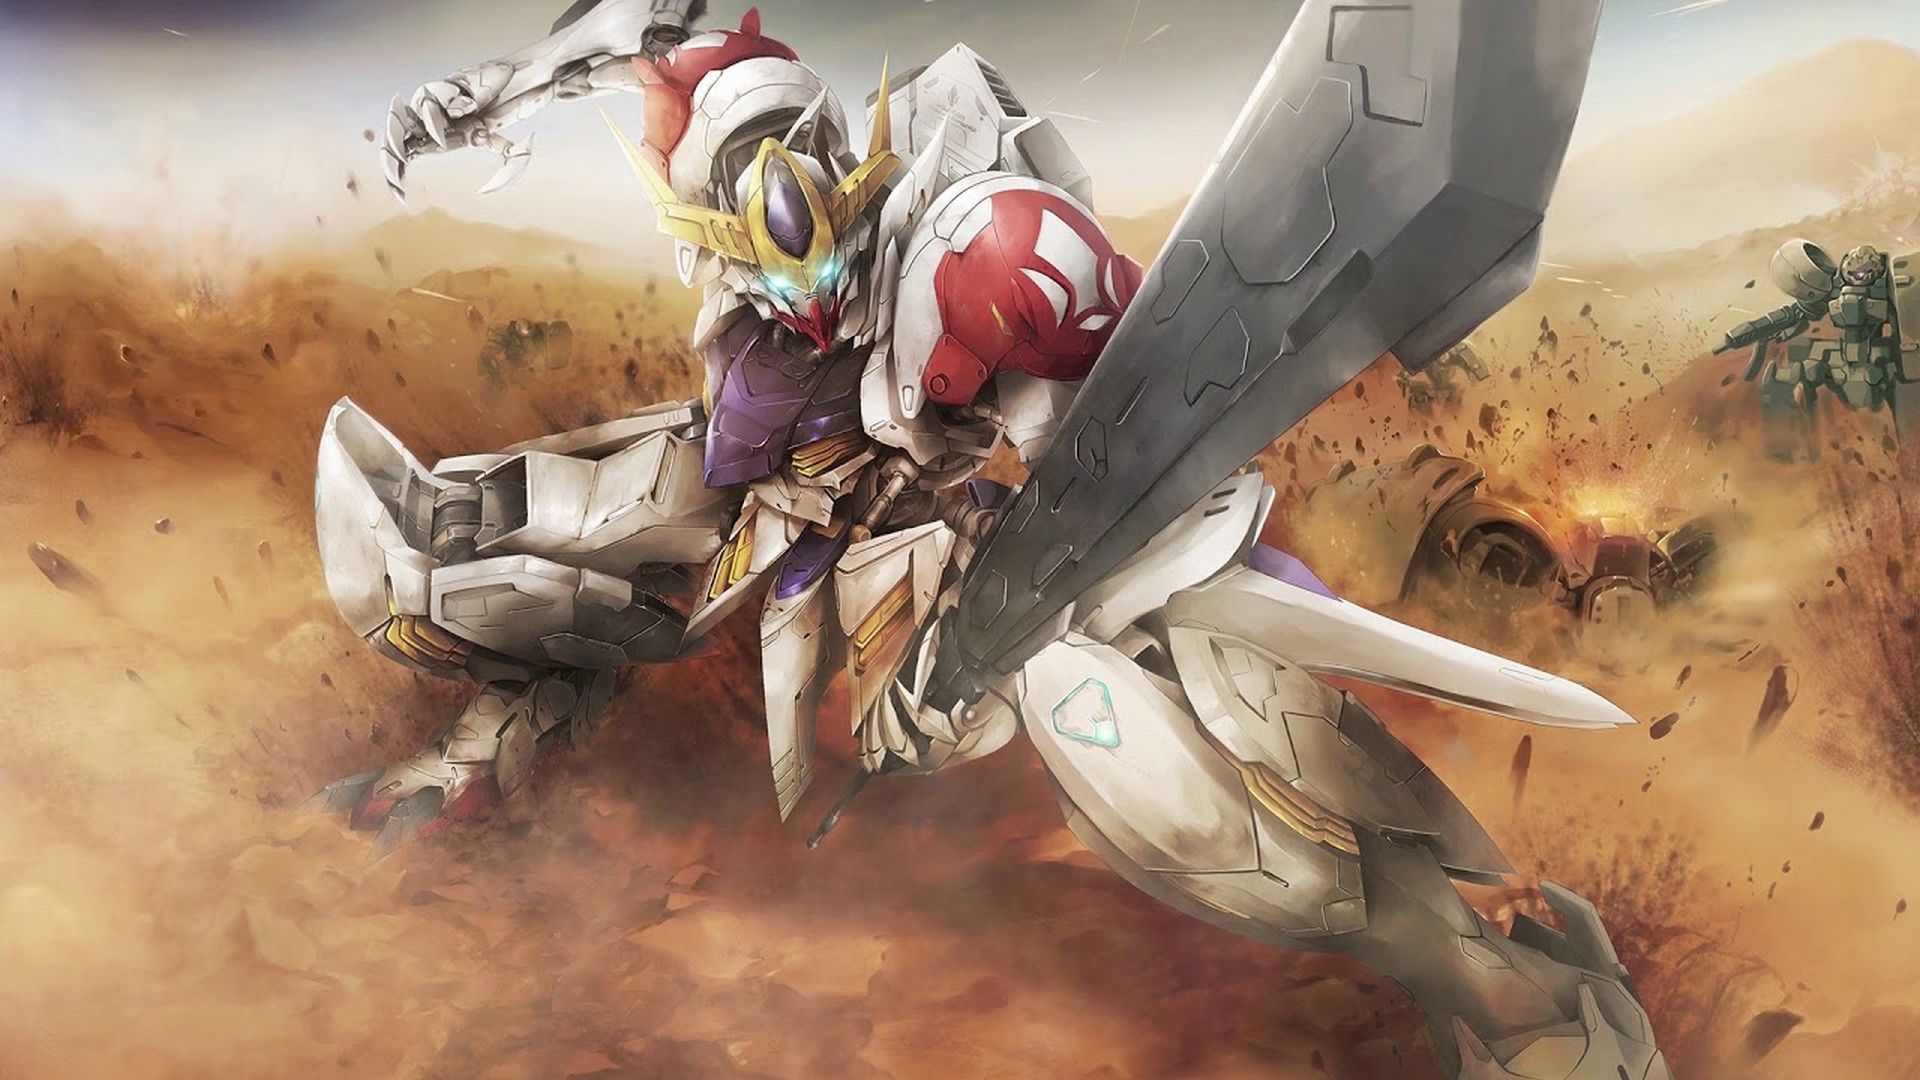 Wallpapers Computer Gundam With high-resolution 1920X1080 pixel. You can use this wallpaper for your Desktop Computer Backgrounds, Mac Wallpapers, Android Lock screen or iPhone Screensavers and another smartphone device